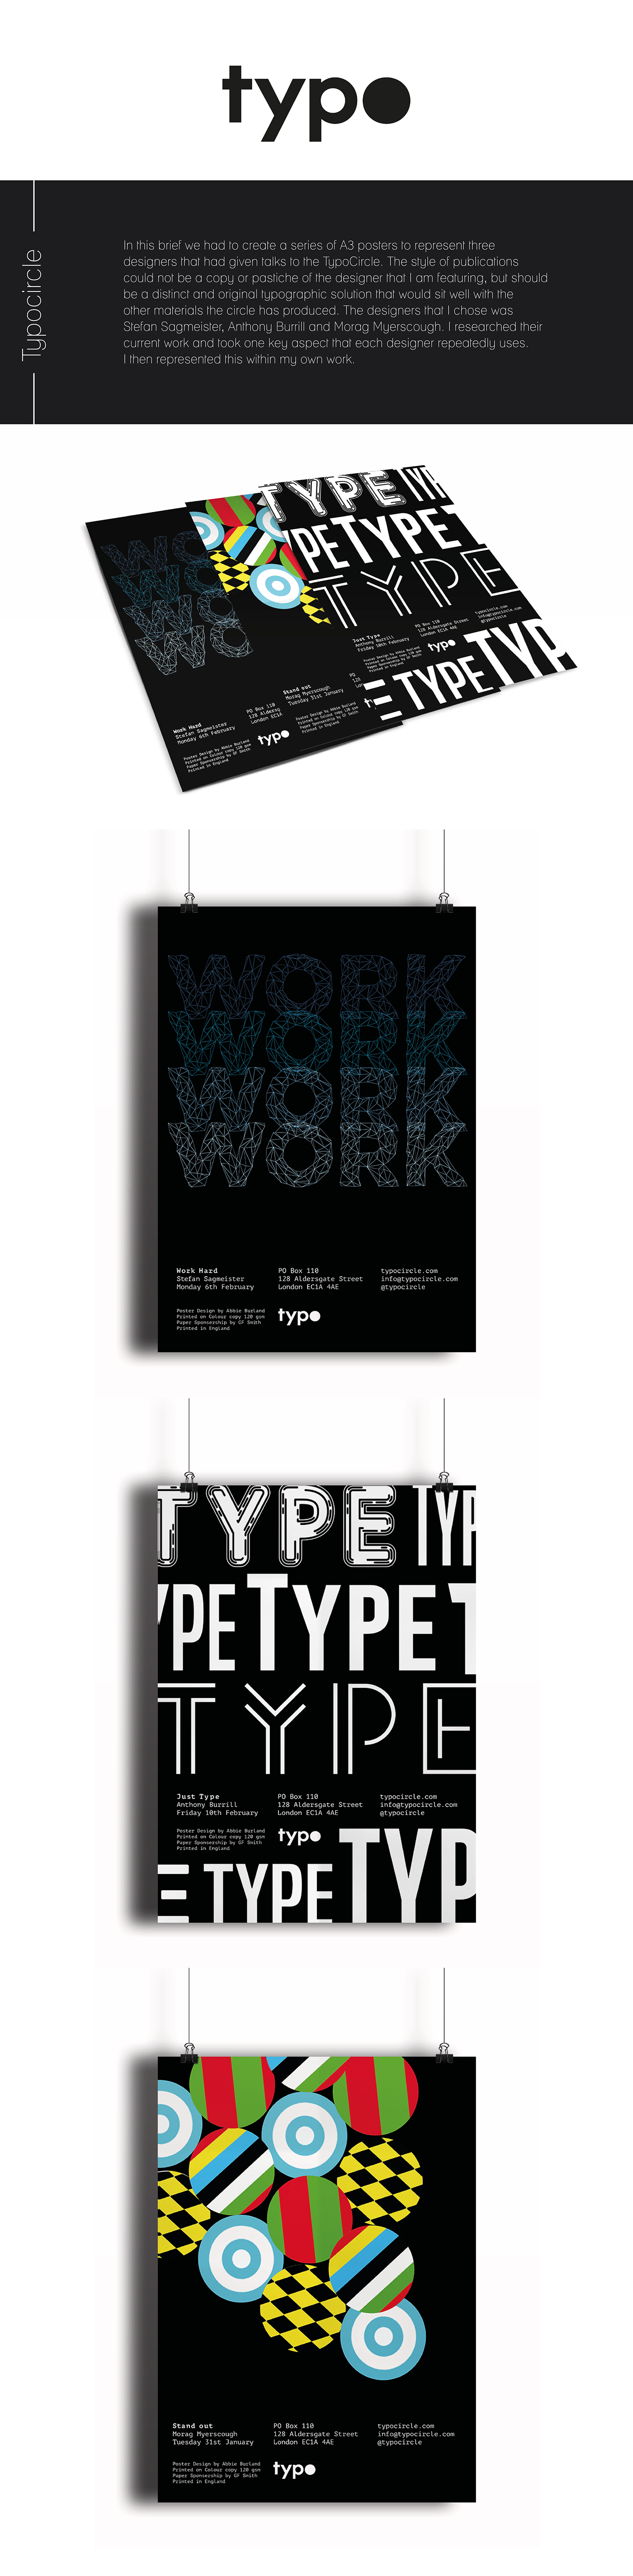 graphic design  typocircle posters design Advertising  typography  